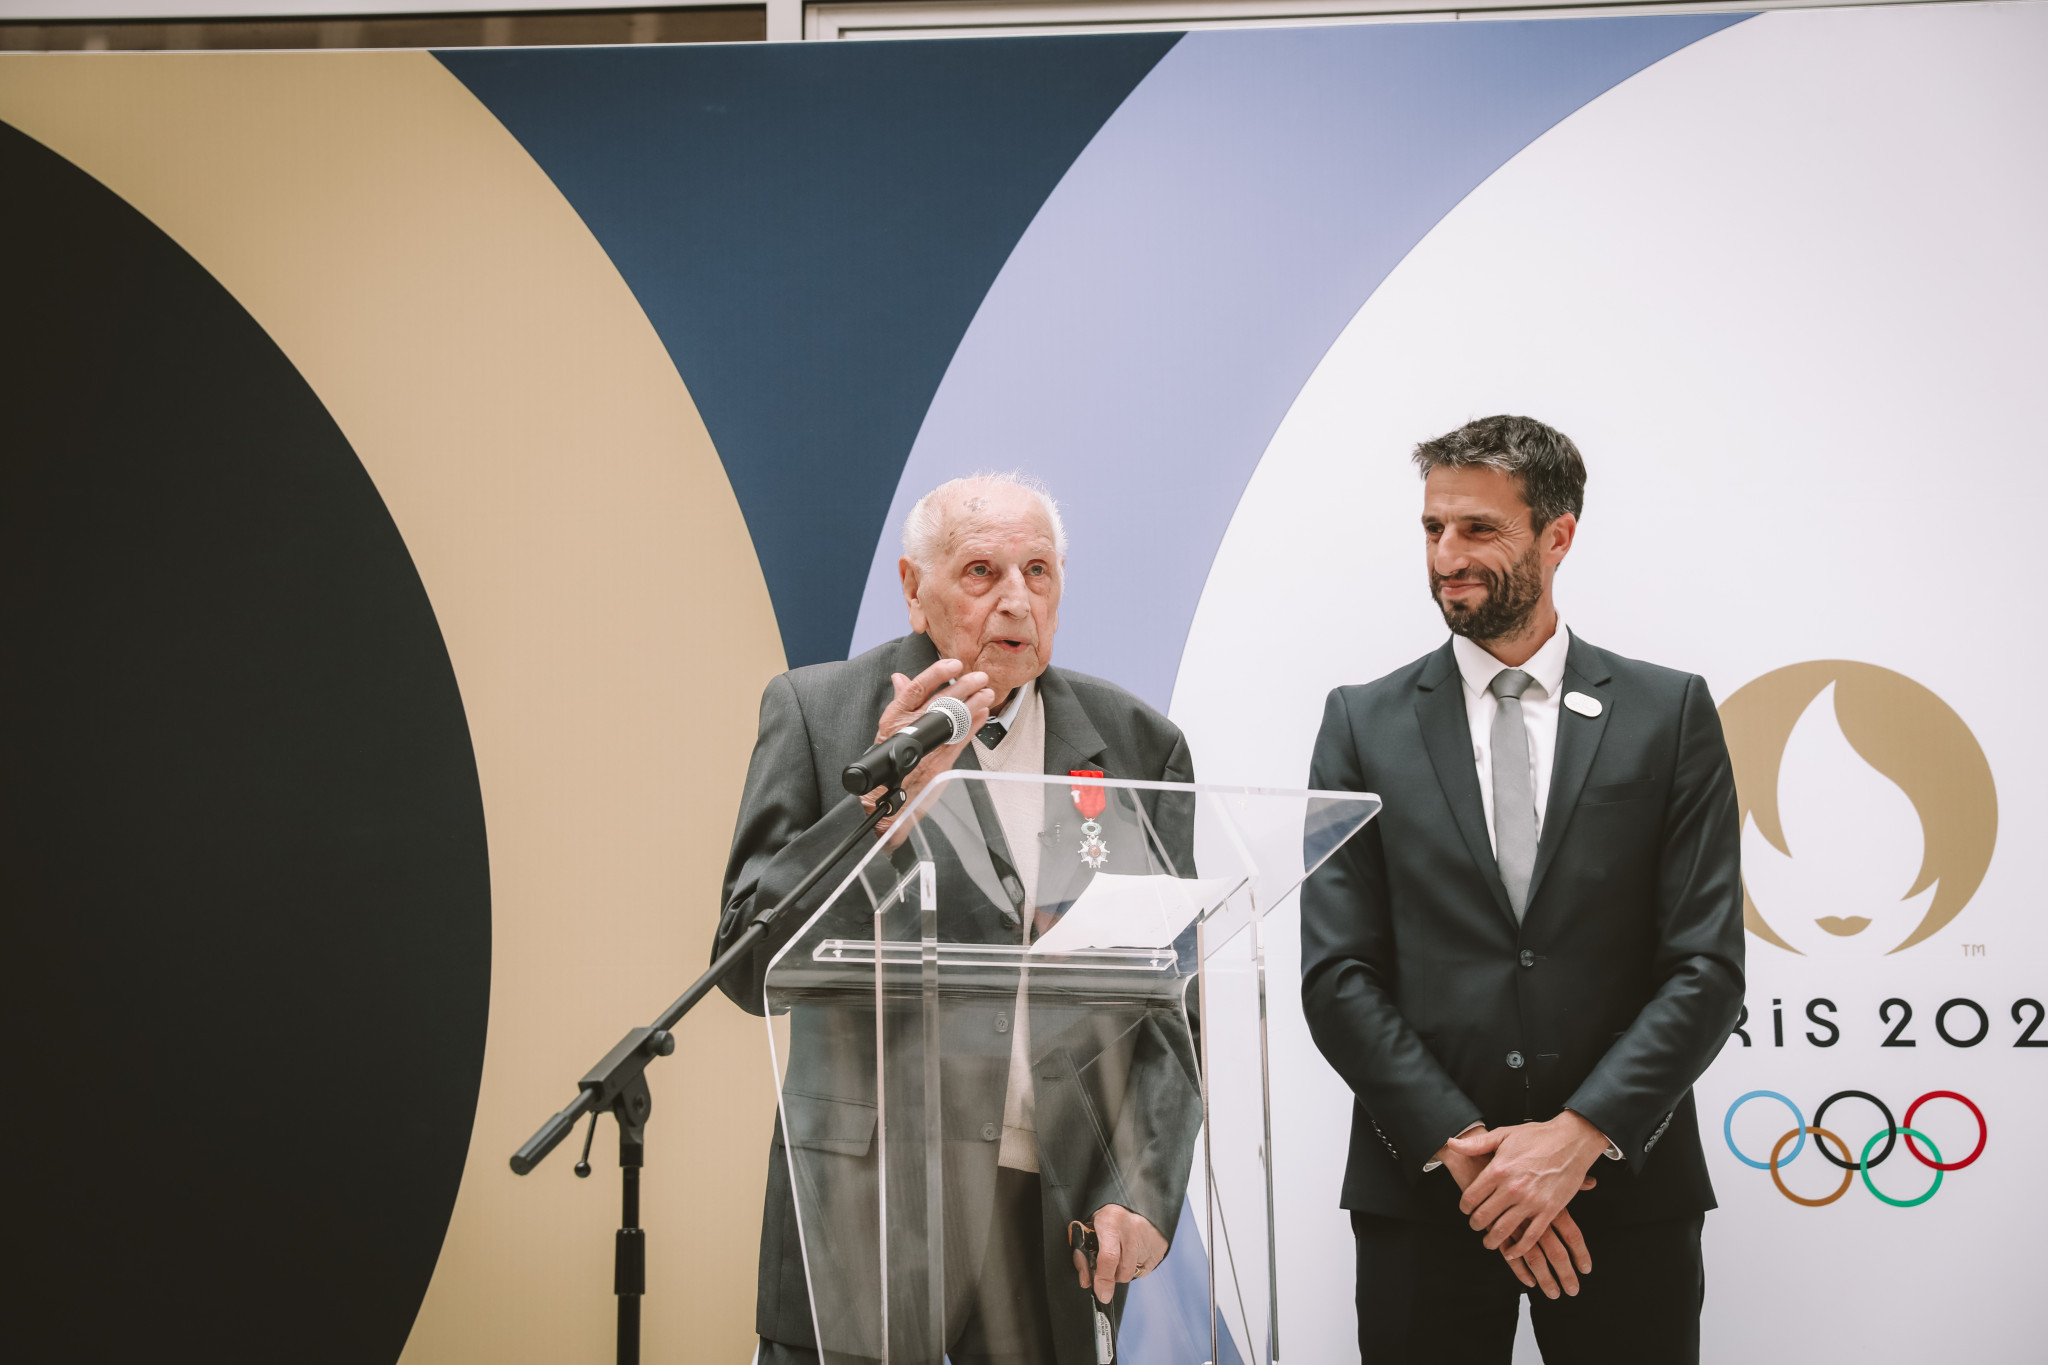 Paris 2024 President Estanguet presents oldest French Olympic champion Coste with Legion of Honour